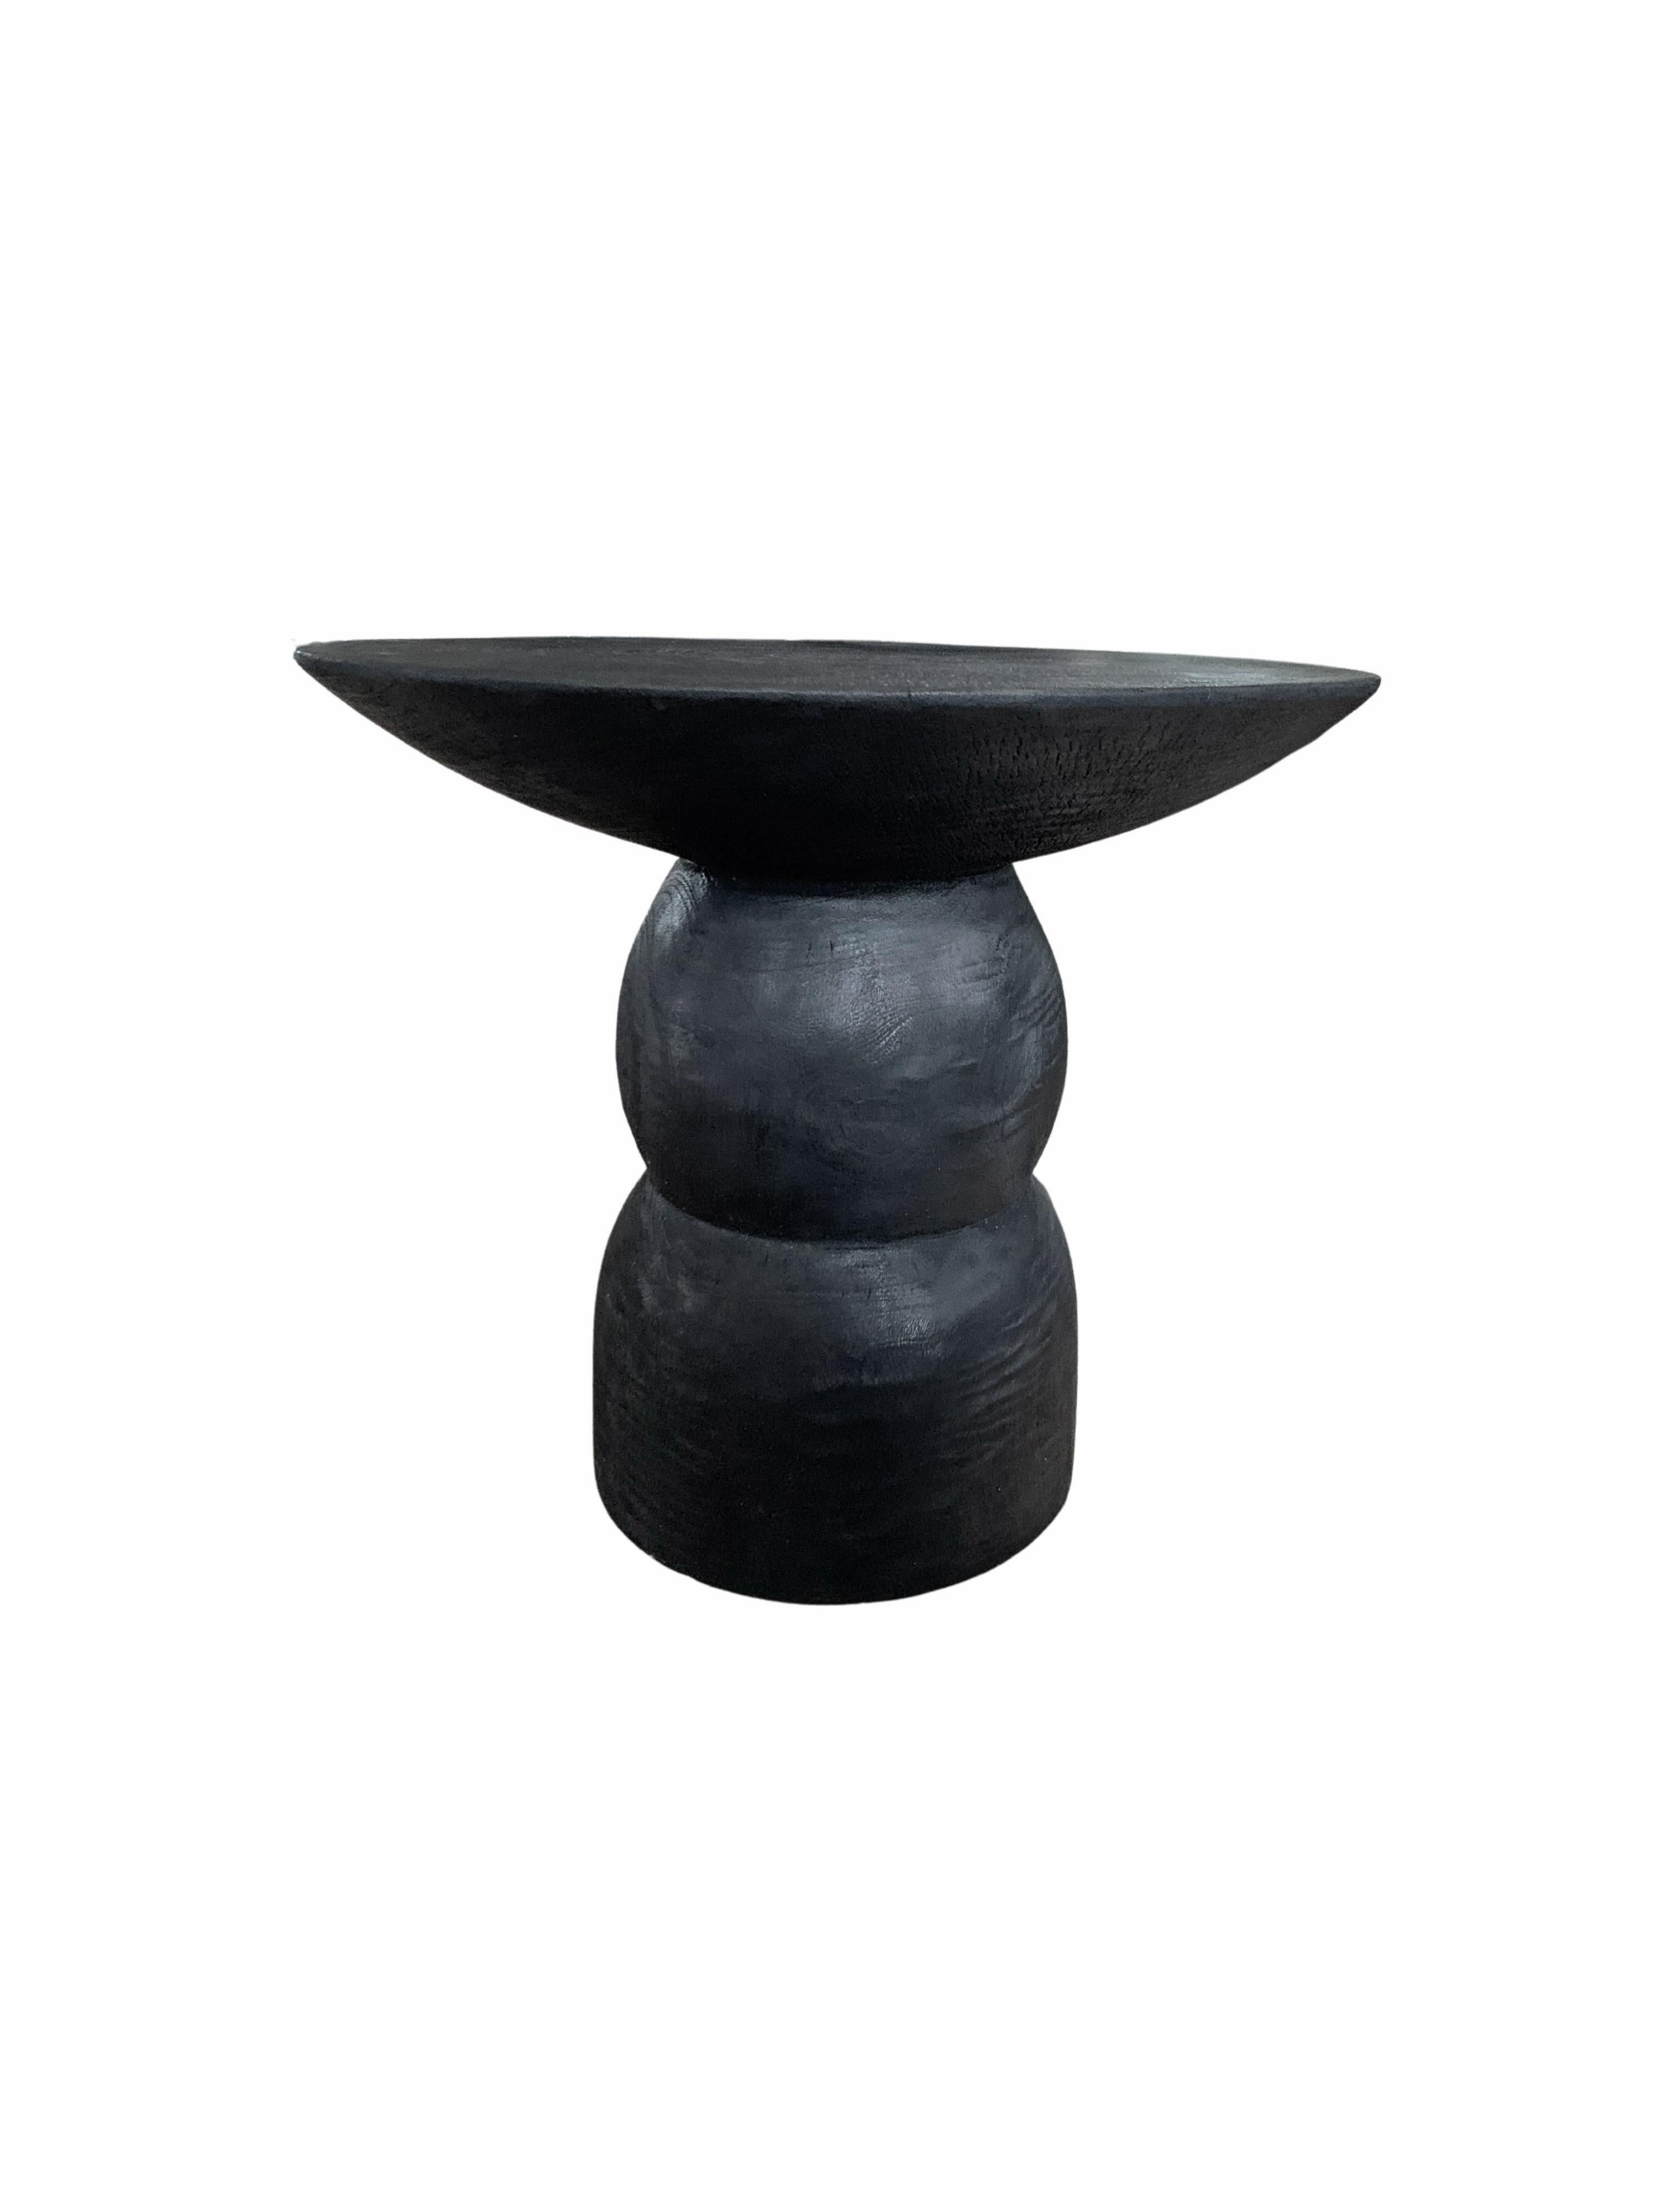 Organic Modern Round Side Table Crafted from Mango Wood Burnt Finish For Sale